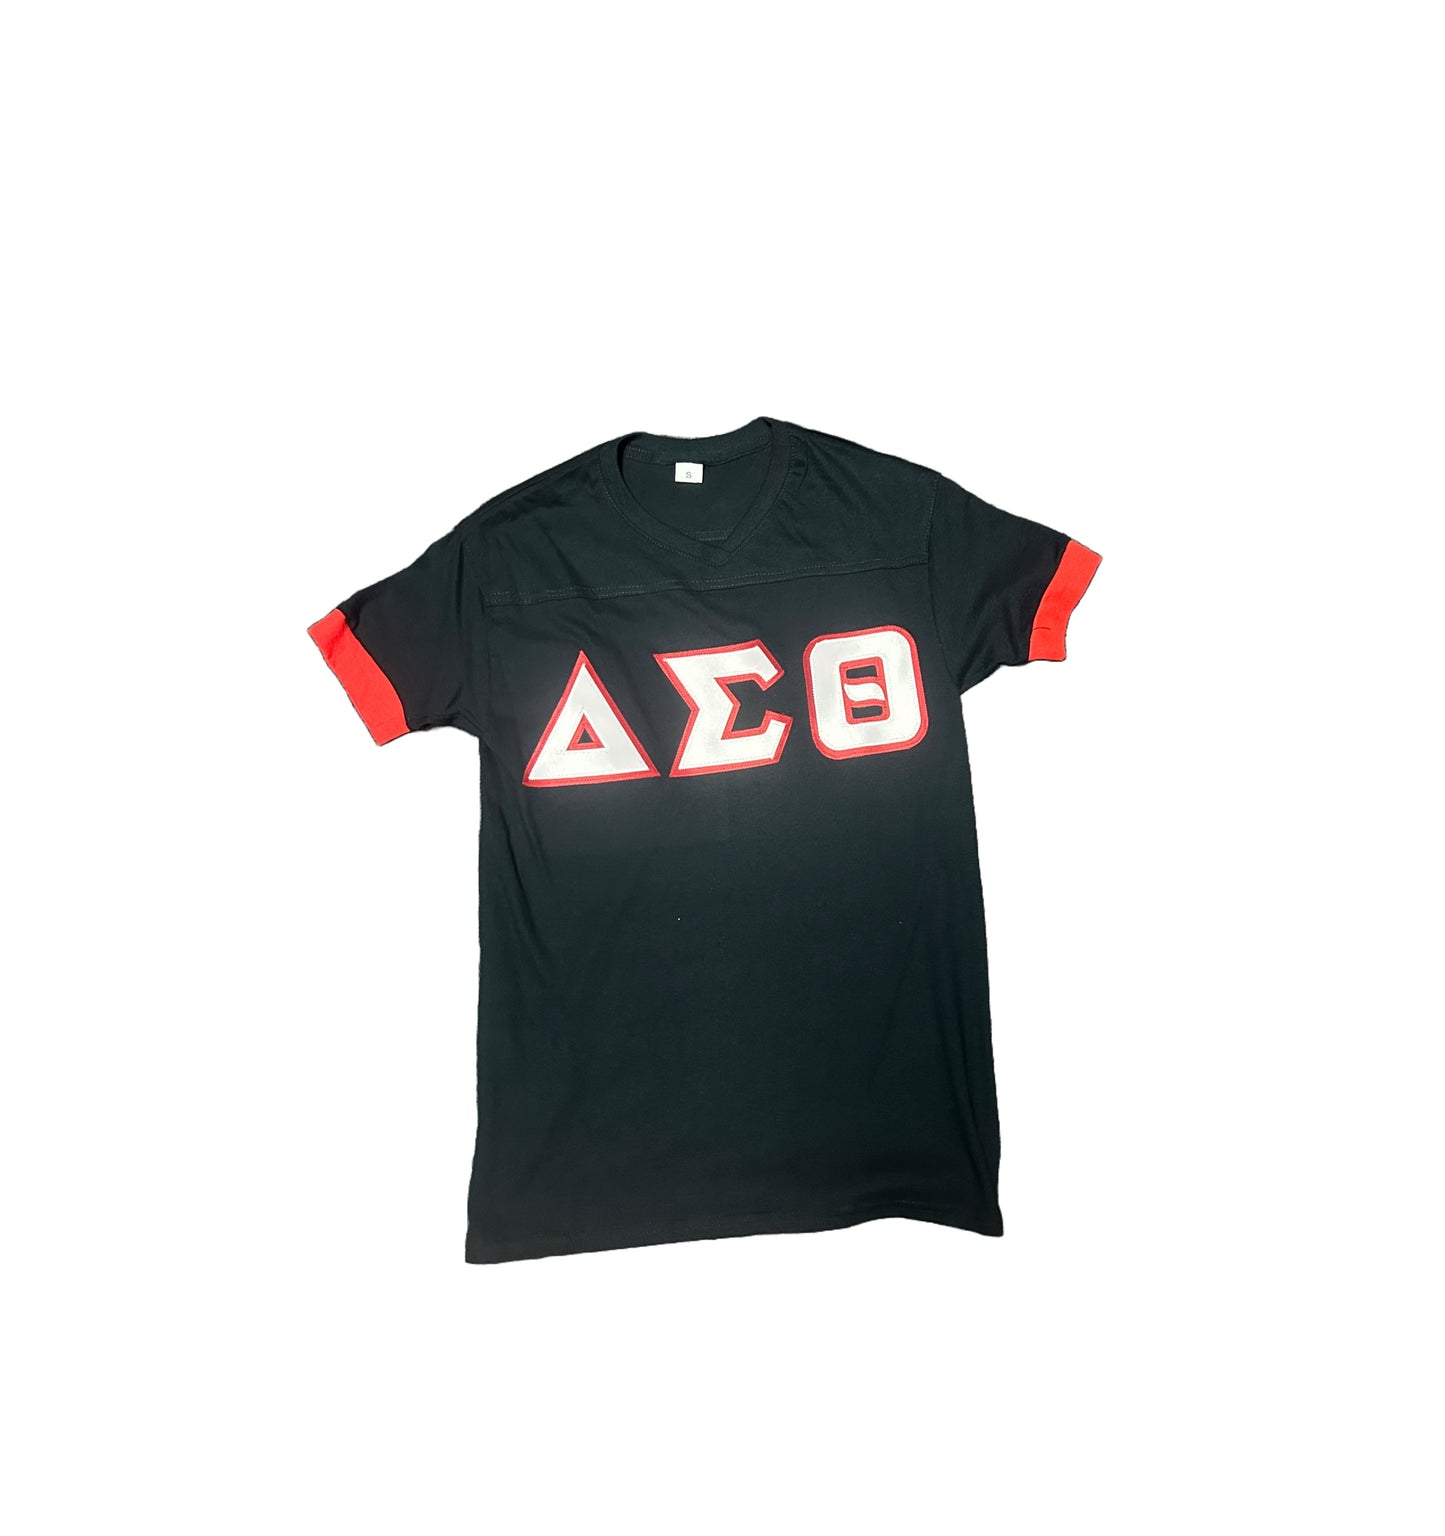 Delta T-Shirt - Classic Greek Letter Embroidered Black Shirt Red Trim